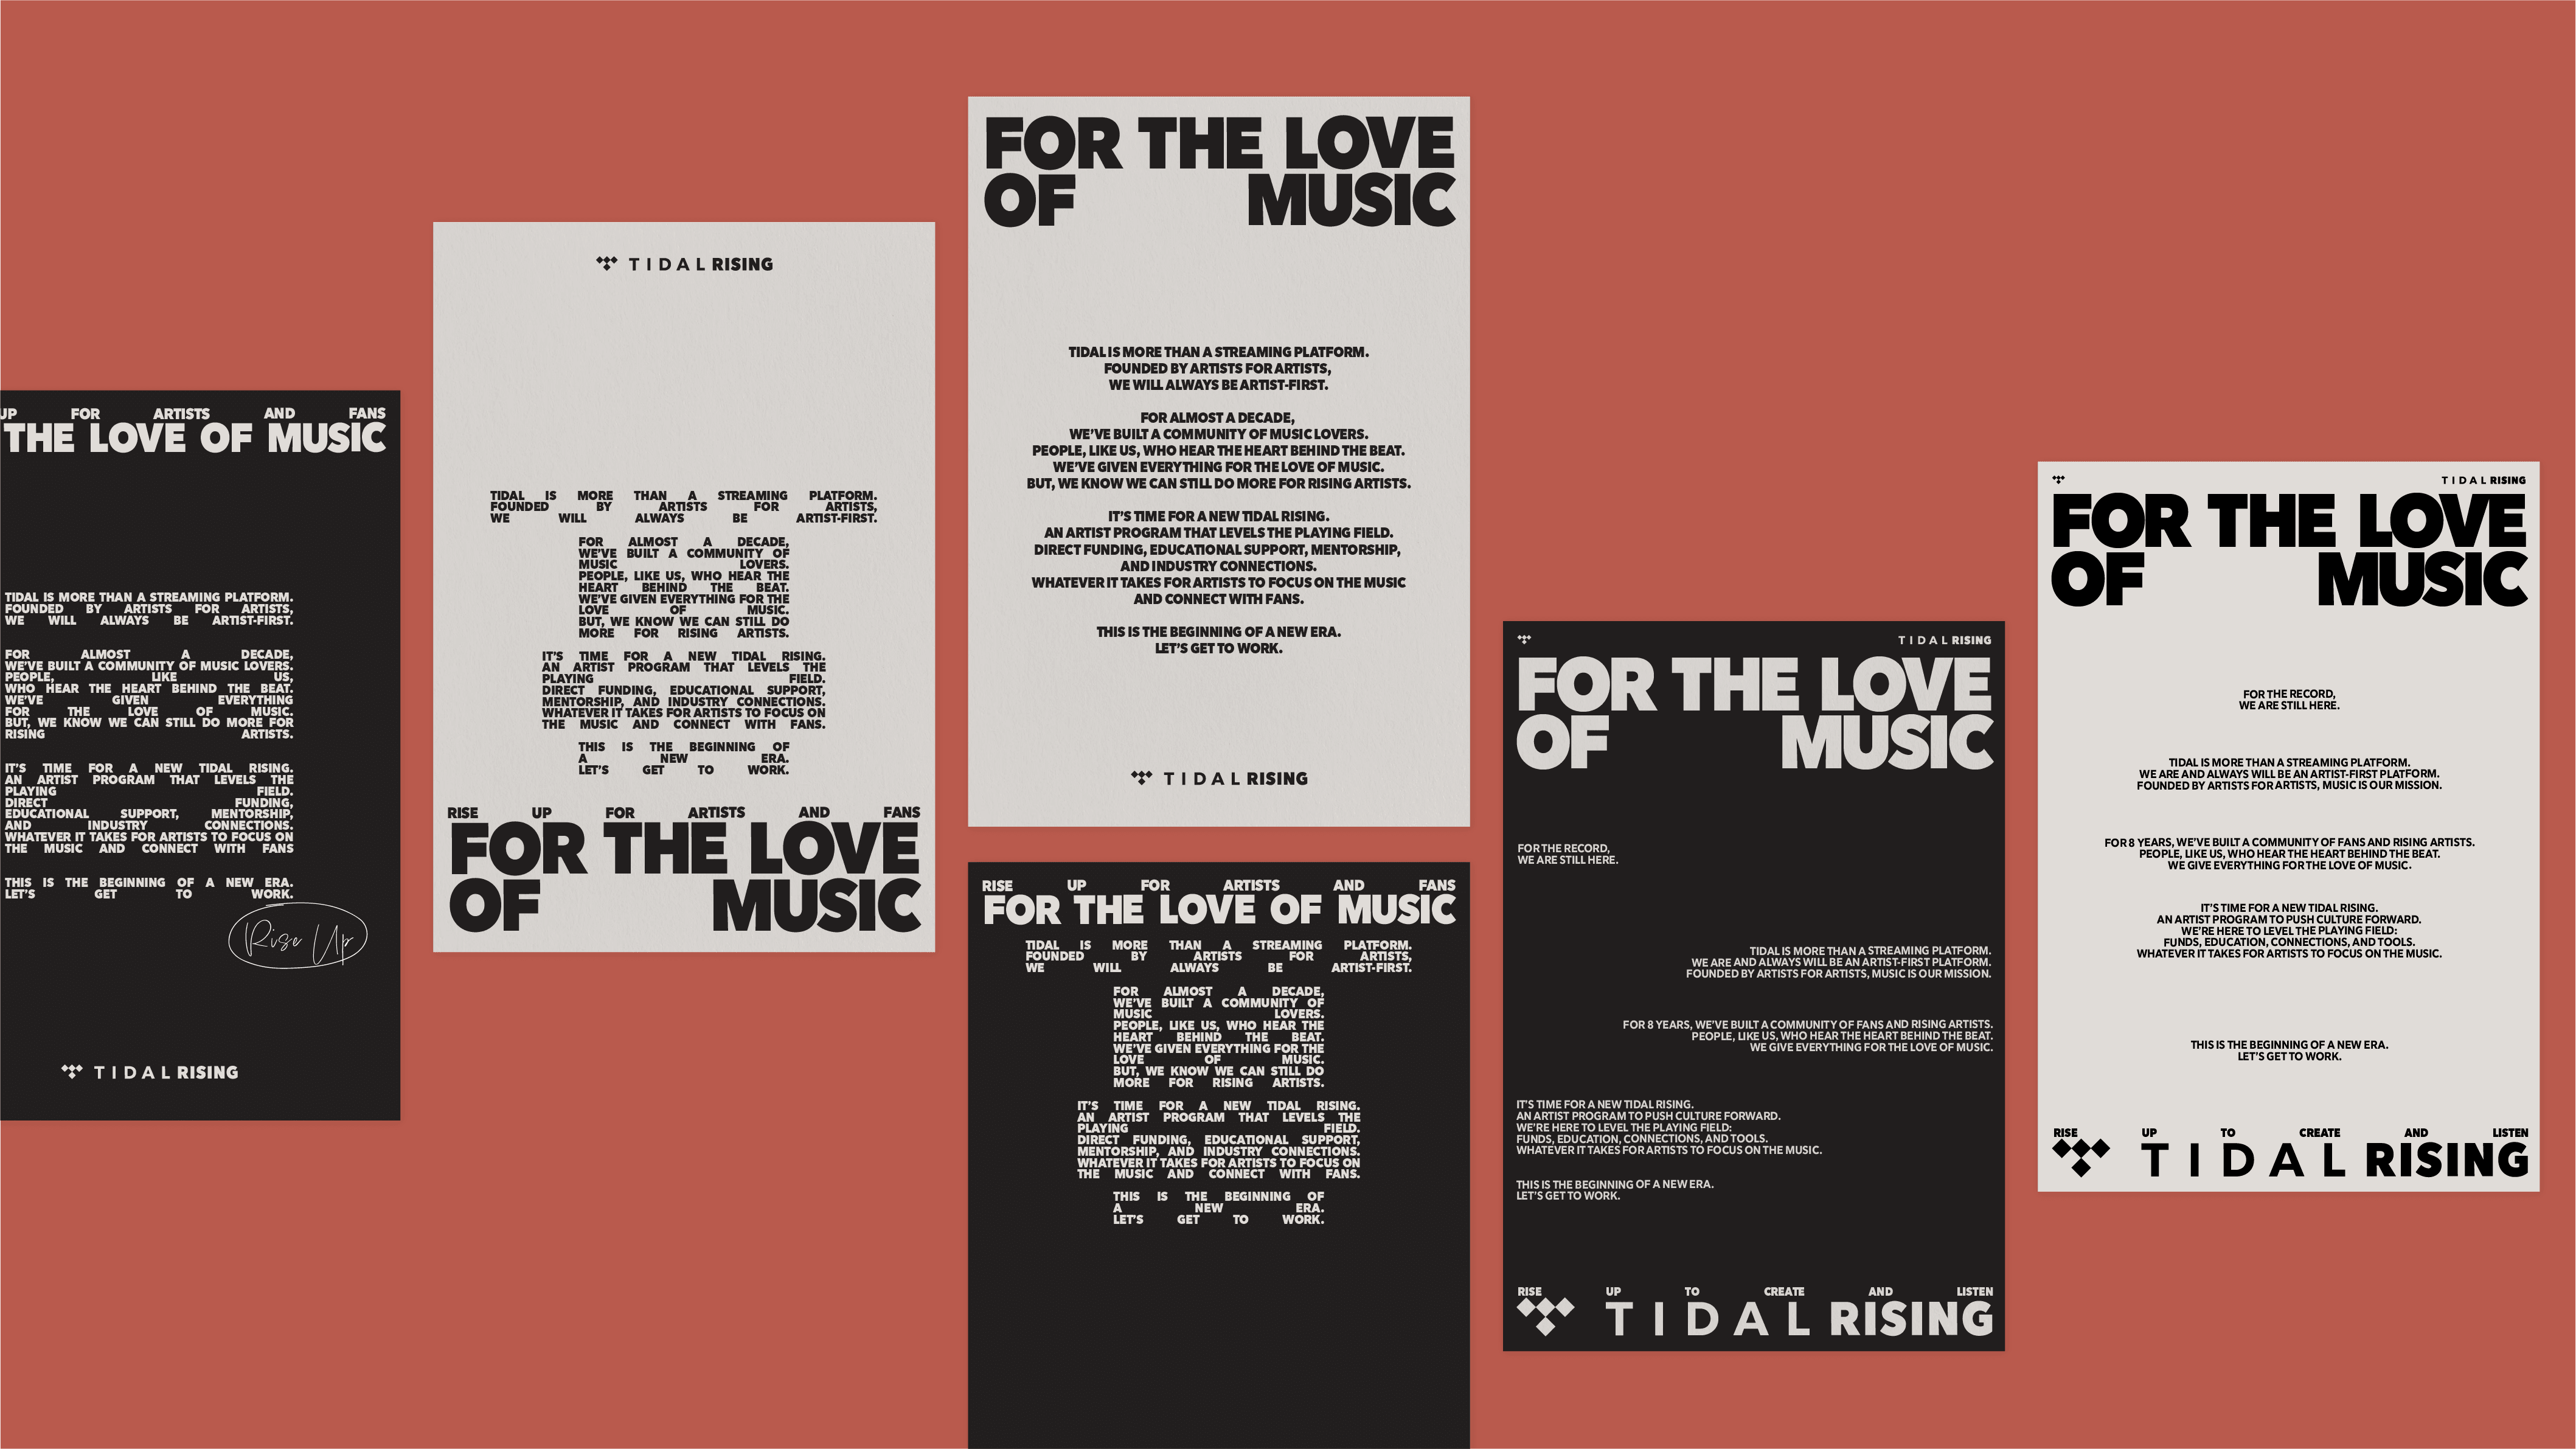 For the love of music. Tidal is more than a streaming platform. Founded by artists for artists, we will always be artist-first. For almost a decade, we've built a community of music lovers. People, like us, who hear the heart behind the beat. We've given everything for the love of music. But, We know we can still do more for rising artists. It's Time for a New Tidal rising. An artist program that levels the playing field. Direct Funding, Educational support, mentorship, and industry connections. Whatever it takes for artists to focus on the music and connect with fans. This is the beginning of a new era. Let's get to work. Tidal Rising